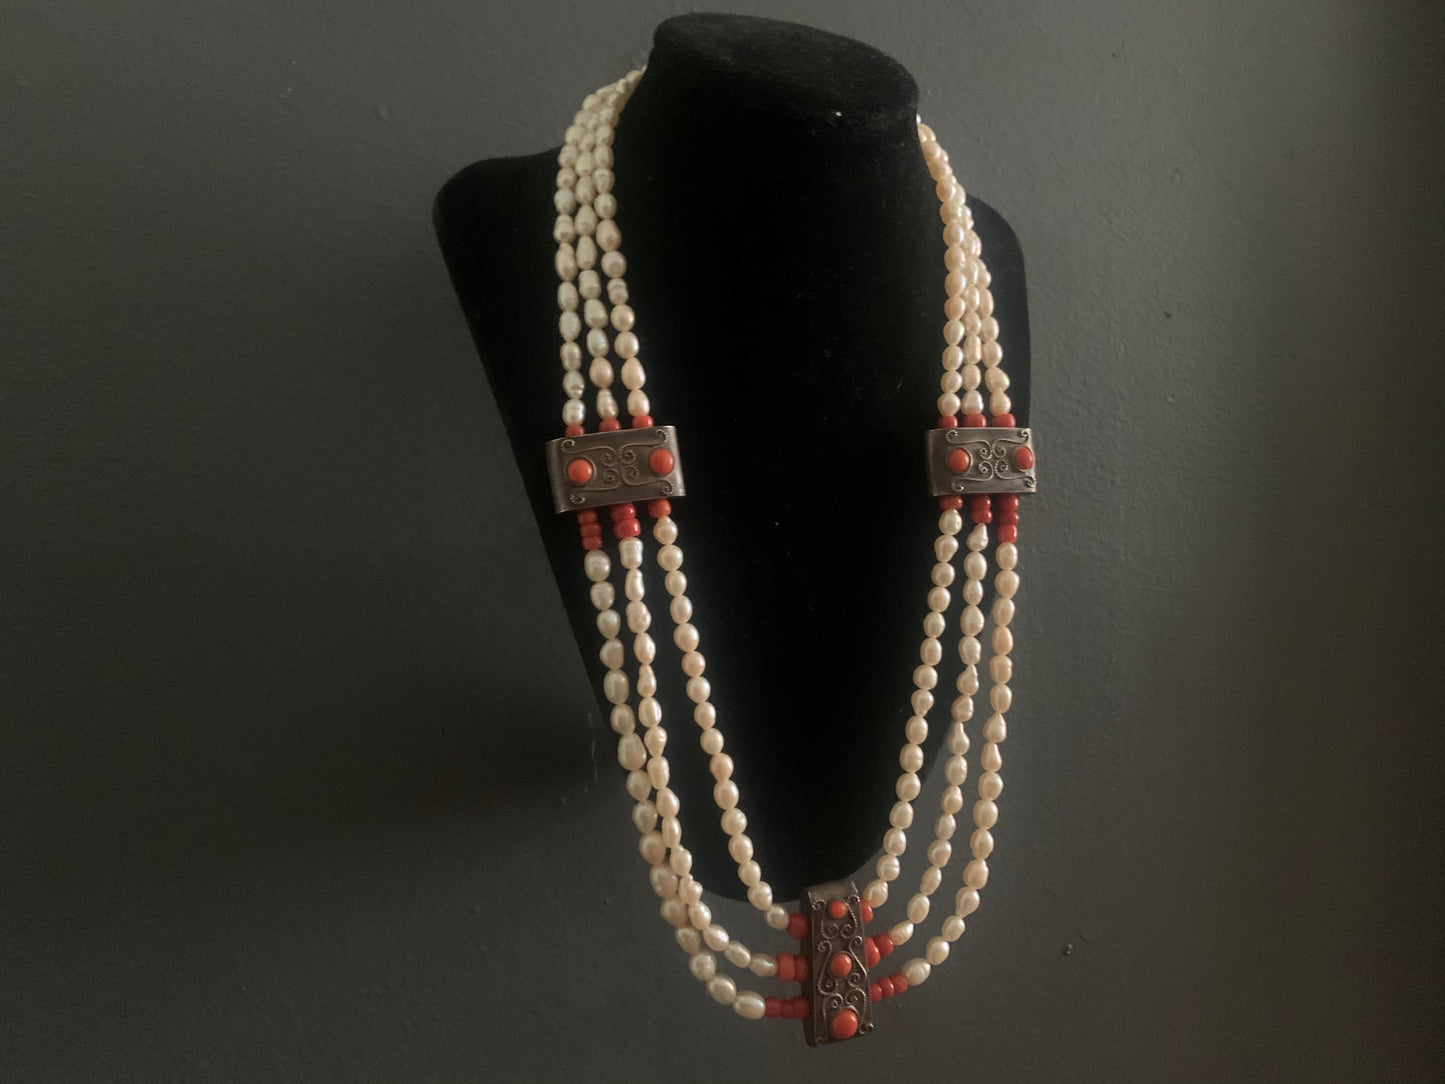 Pearl and coral necklace